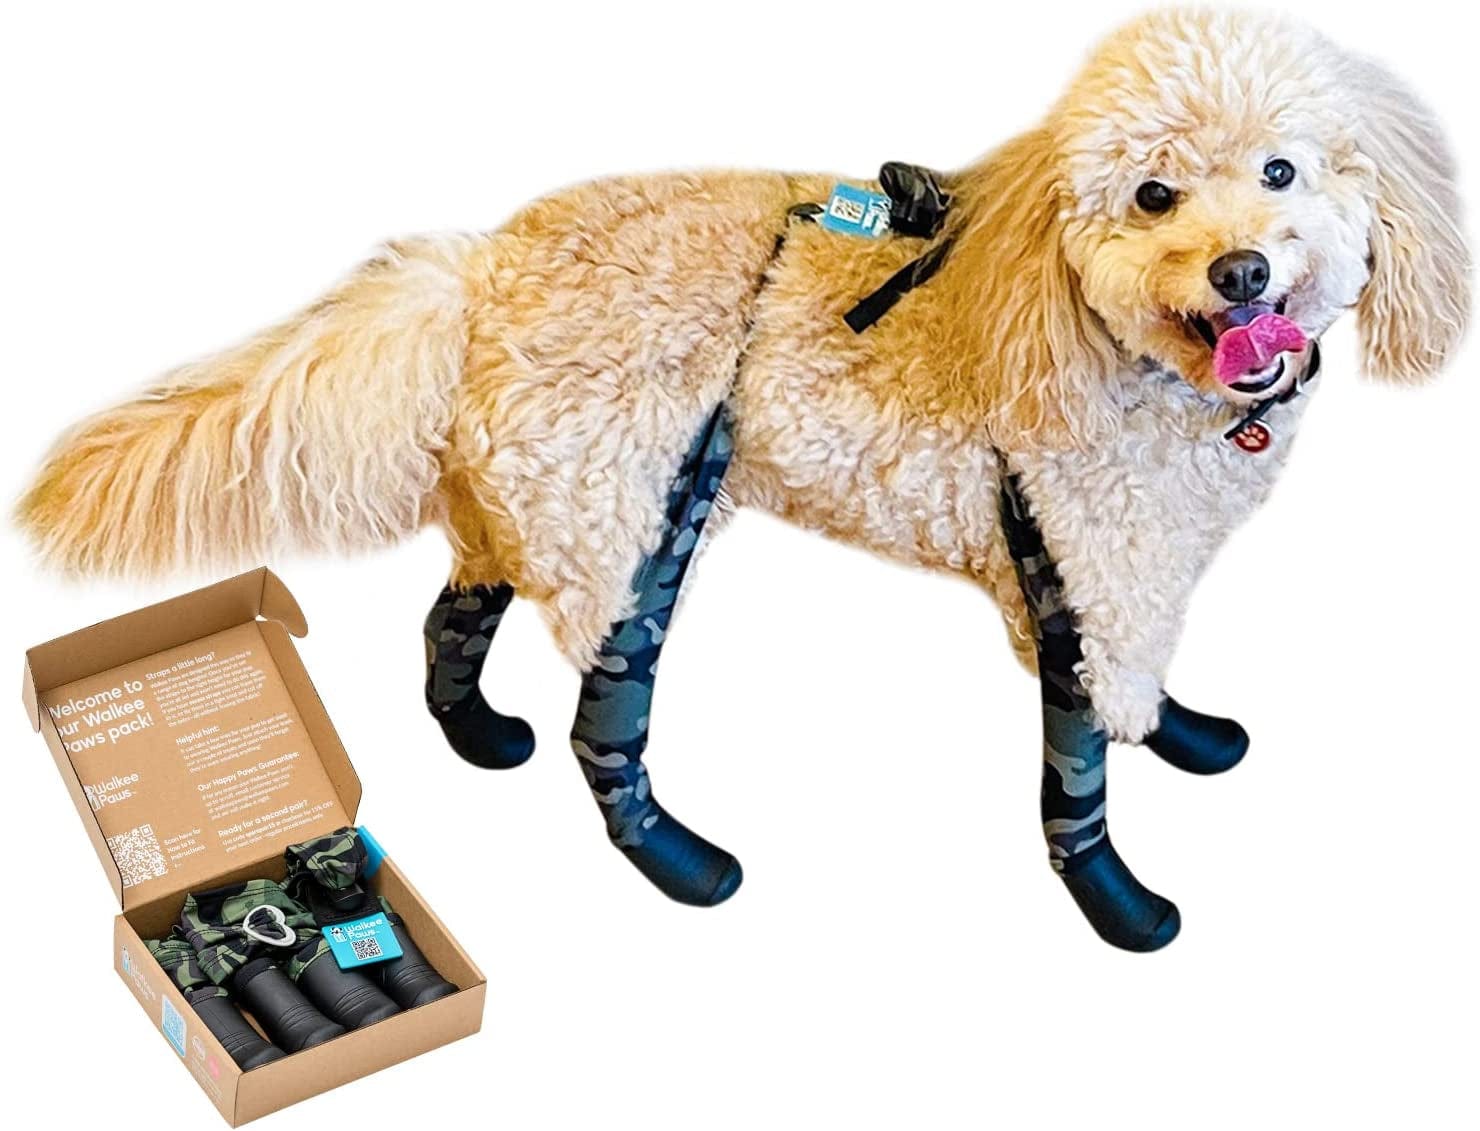 Walkee Paws New Deluxe Easy-On Dog Boot Leggings, Seen on